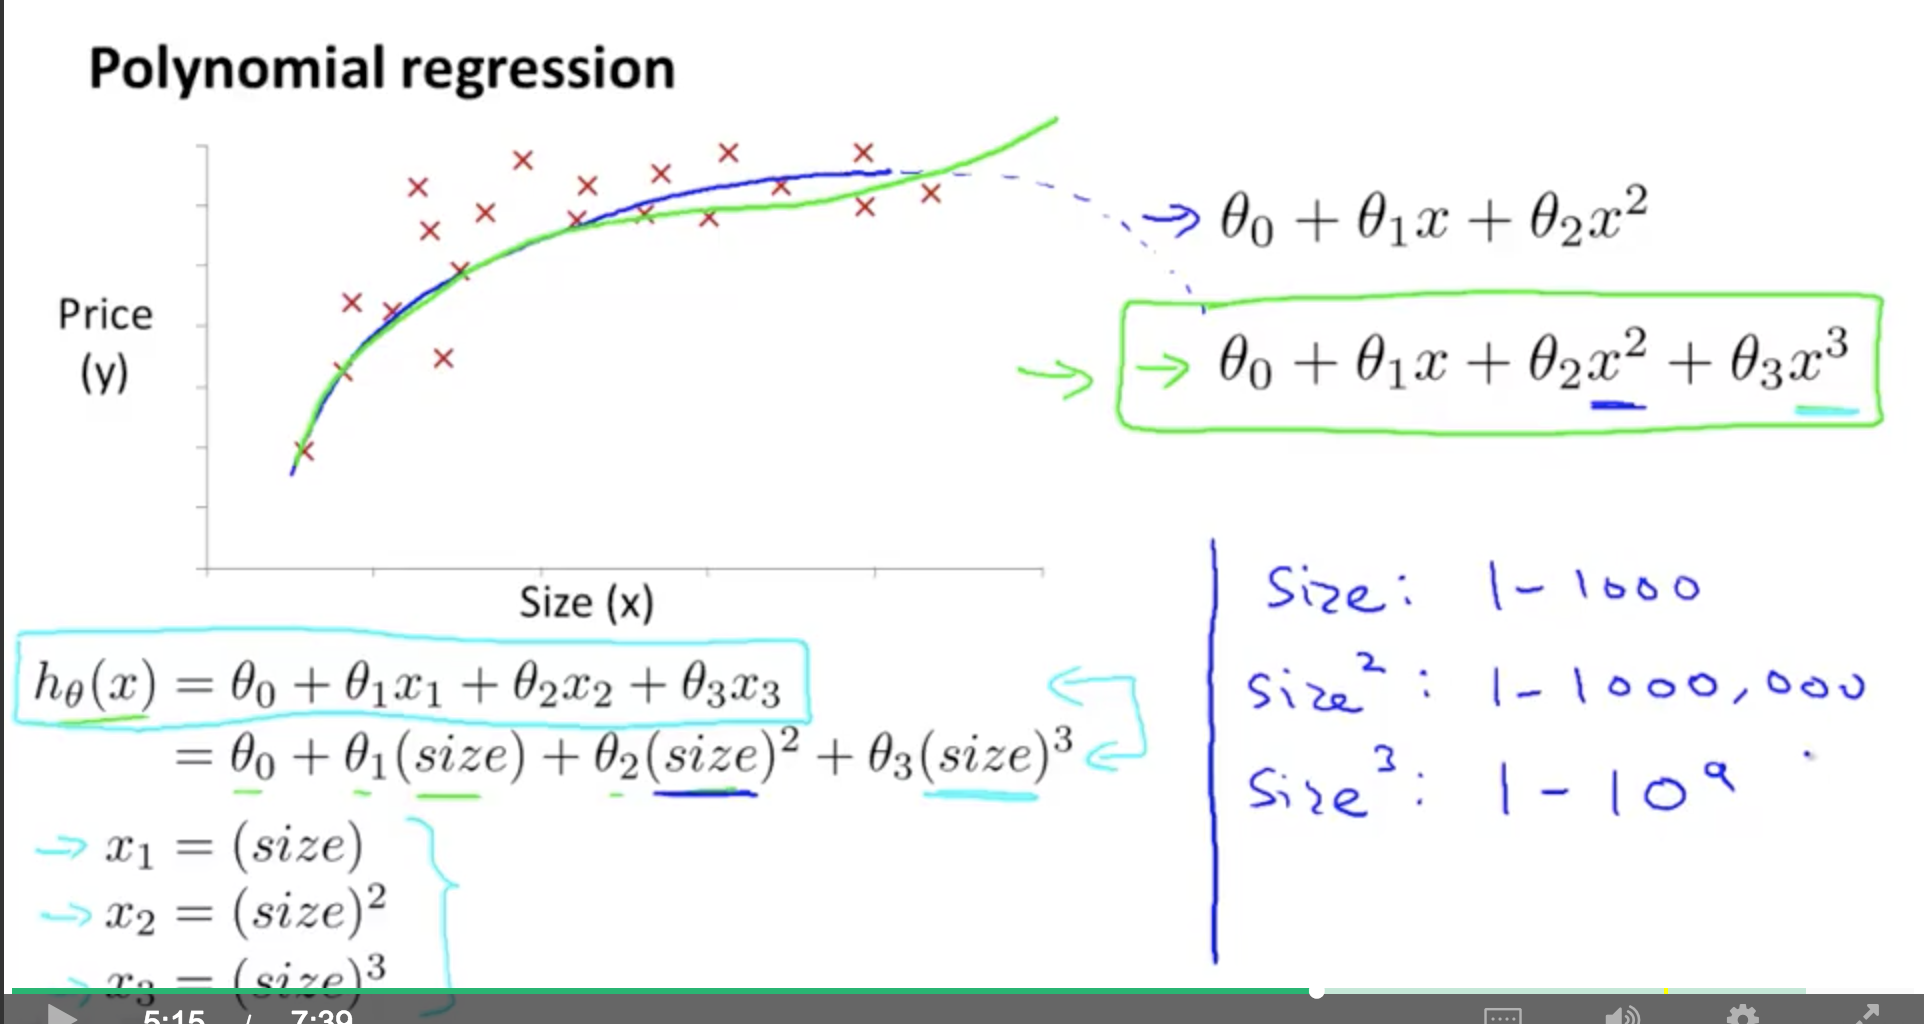 hypothesis function in ml